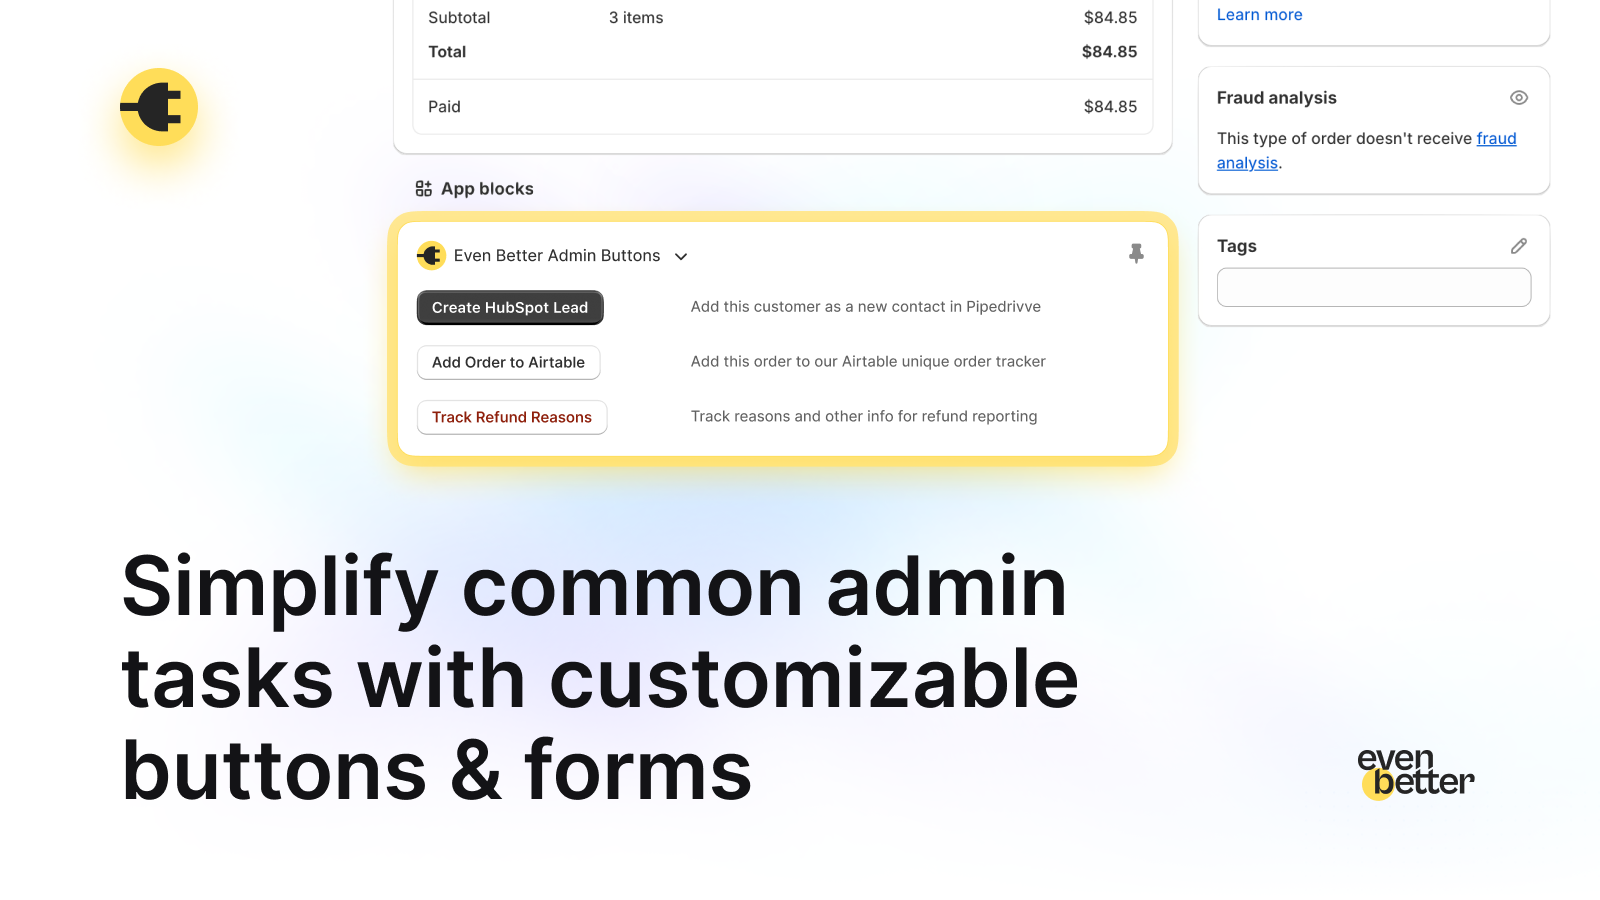 Simplify common admin tasks with customizable buttons & forms